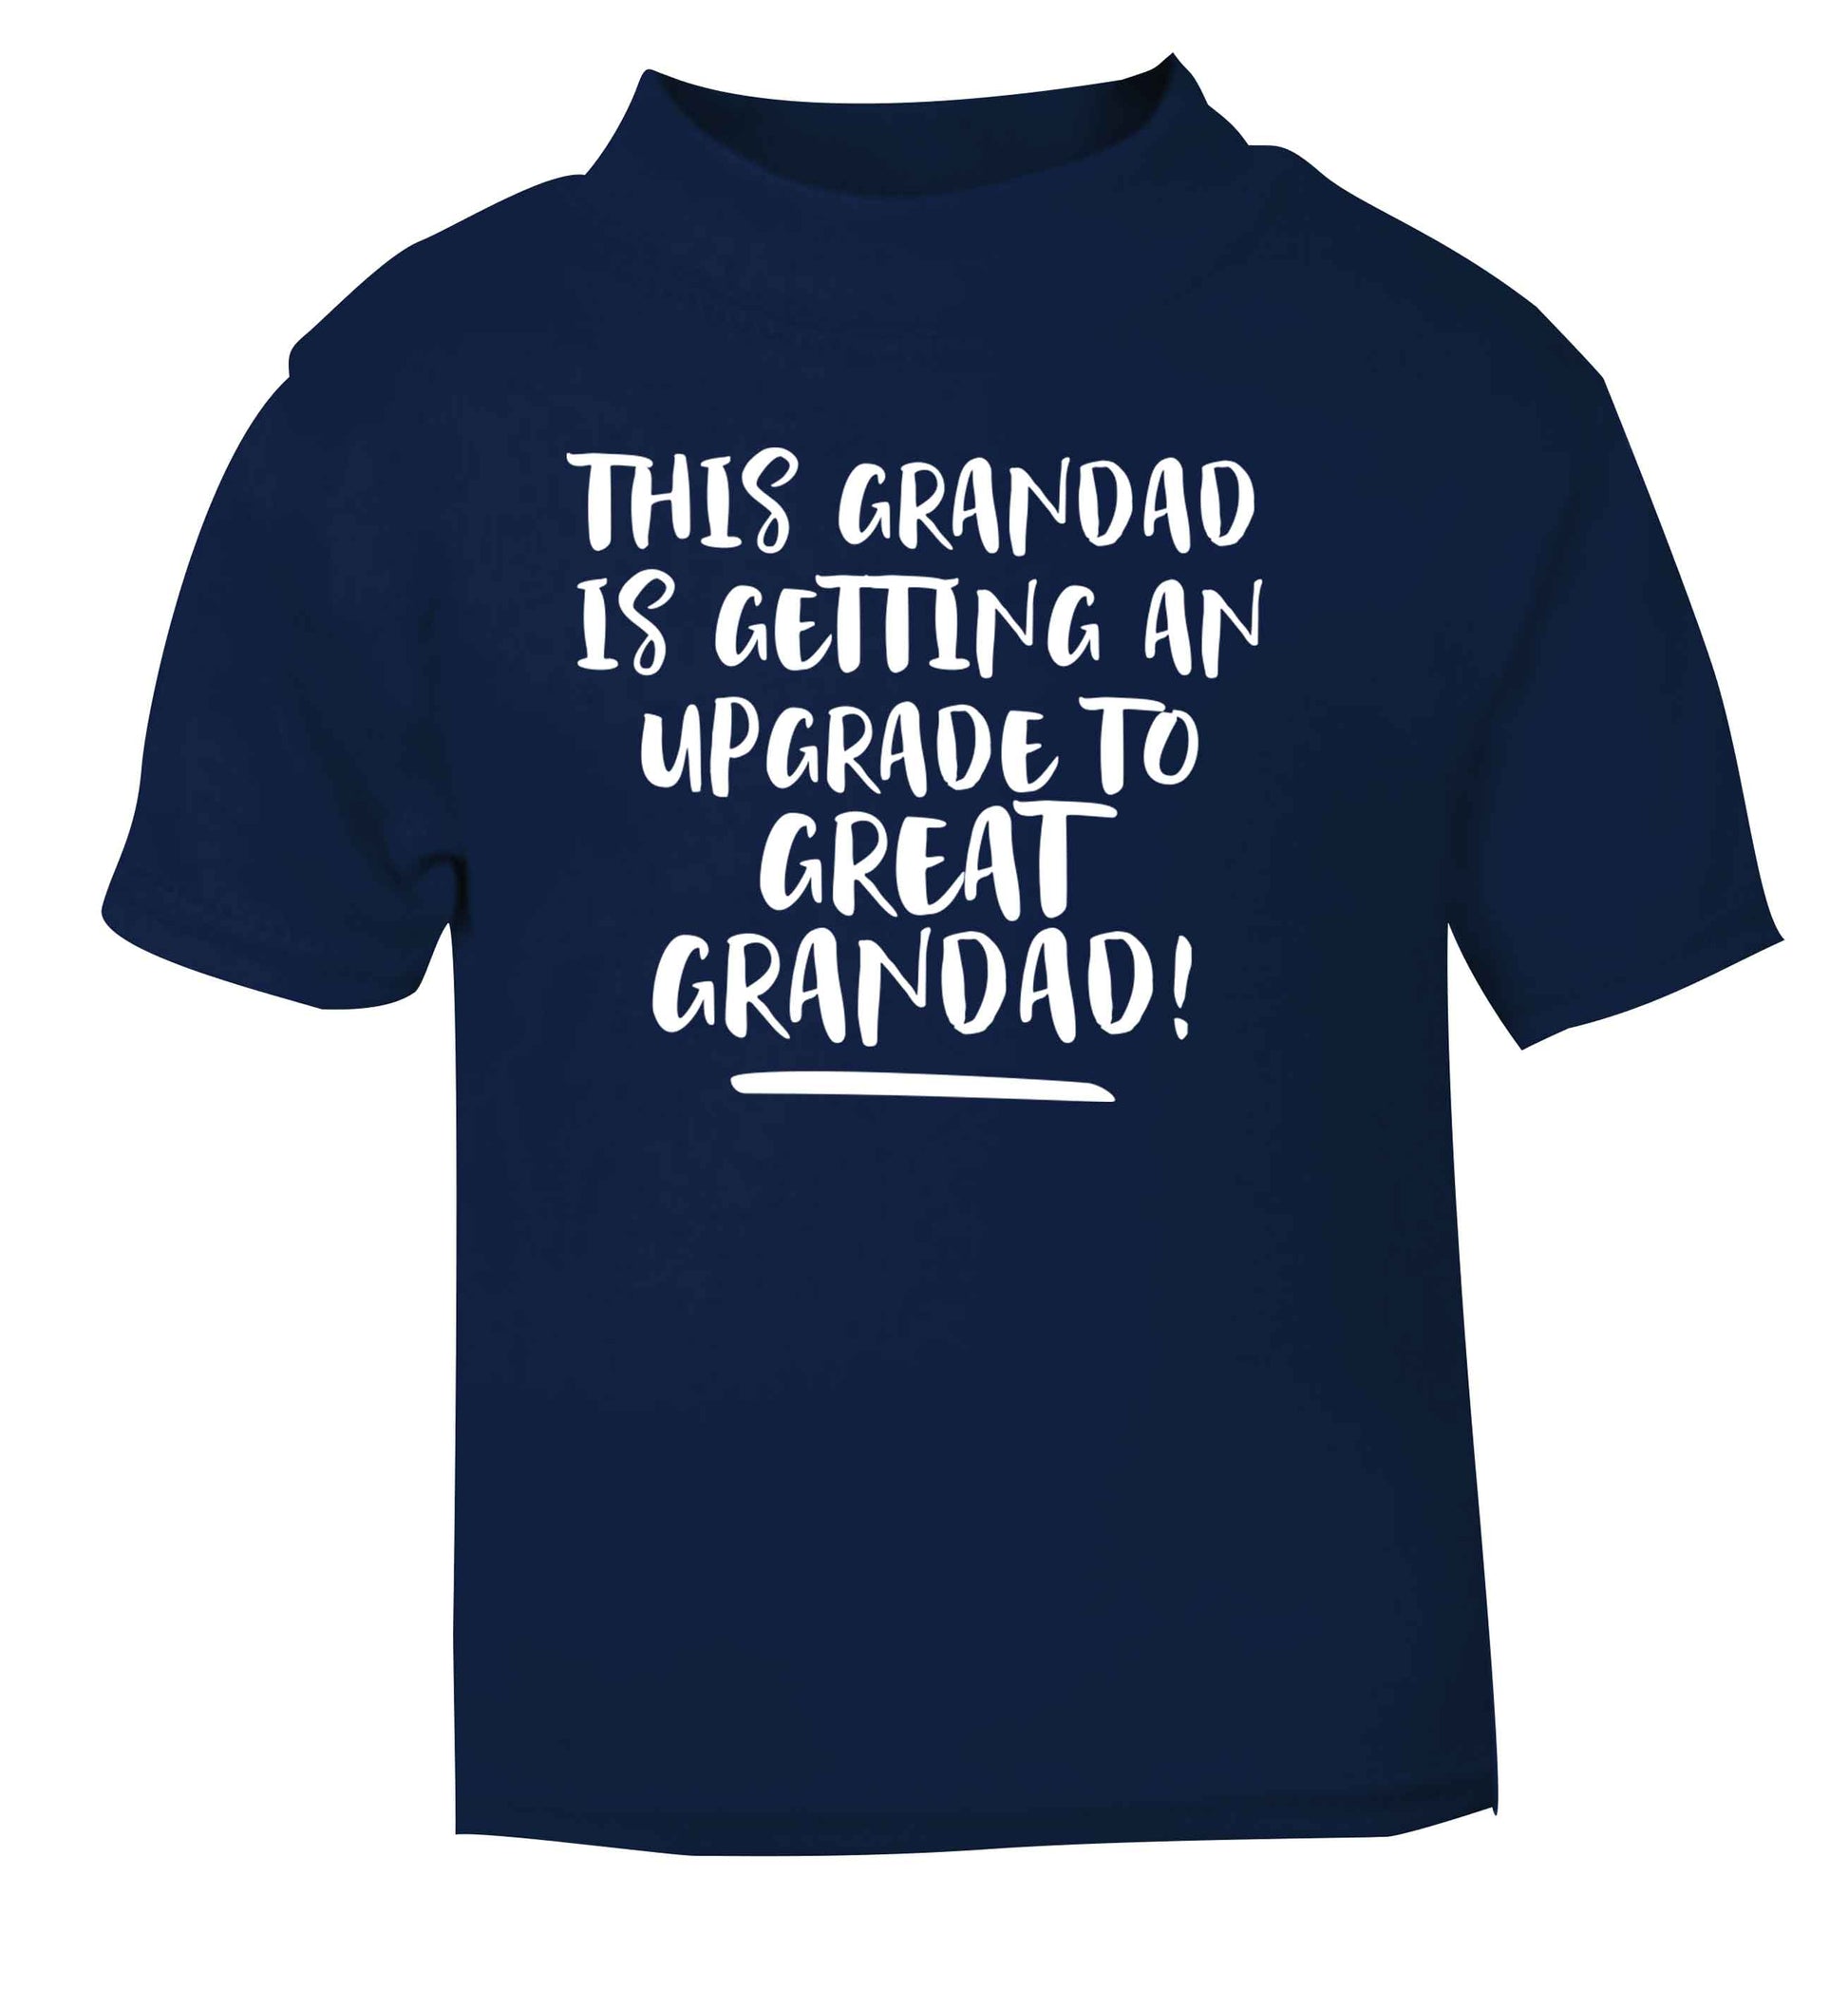 This grandad is getting an upgrade to great grandad! navy Baby Toddler Tshirt 2 Years